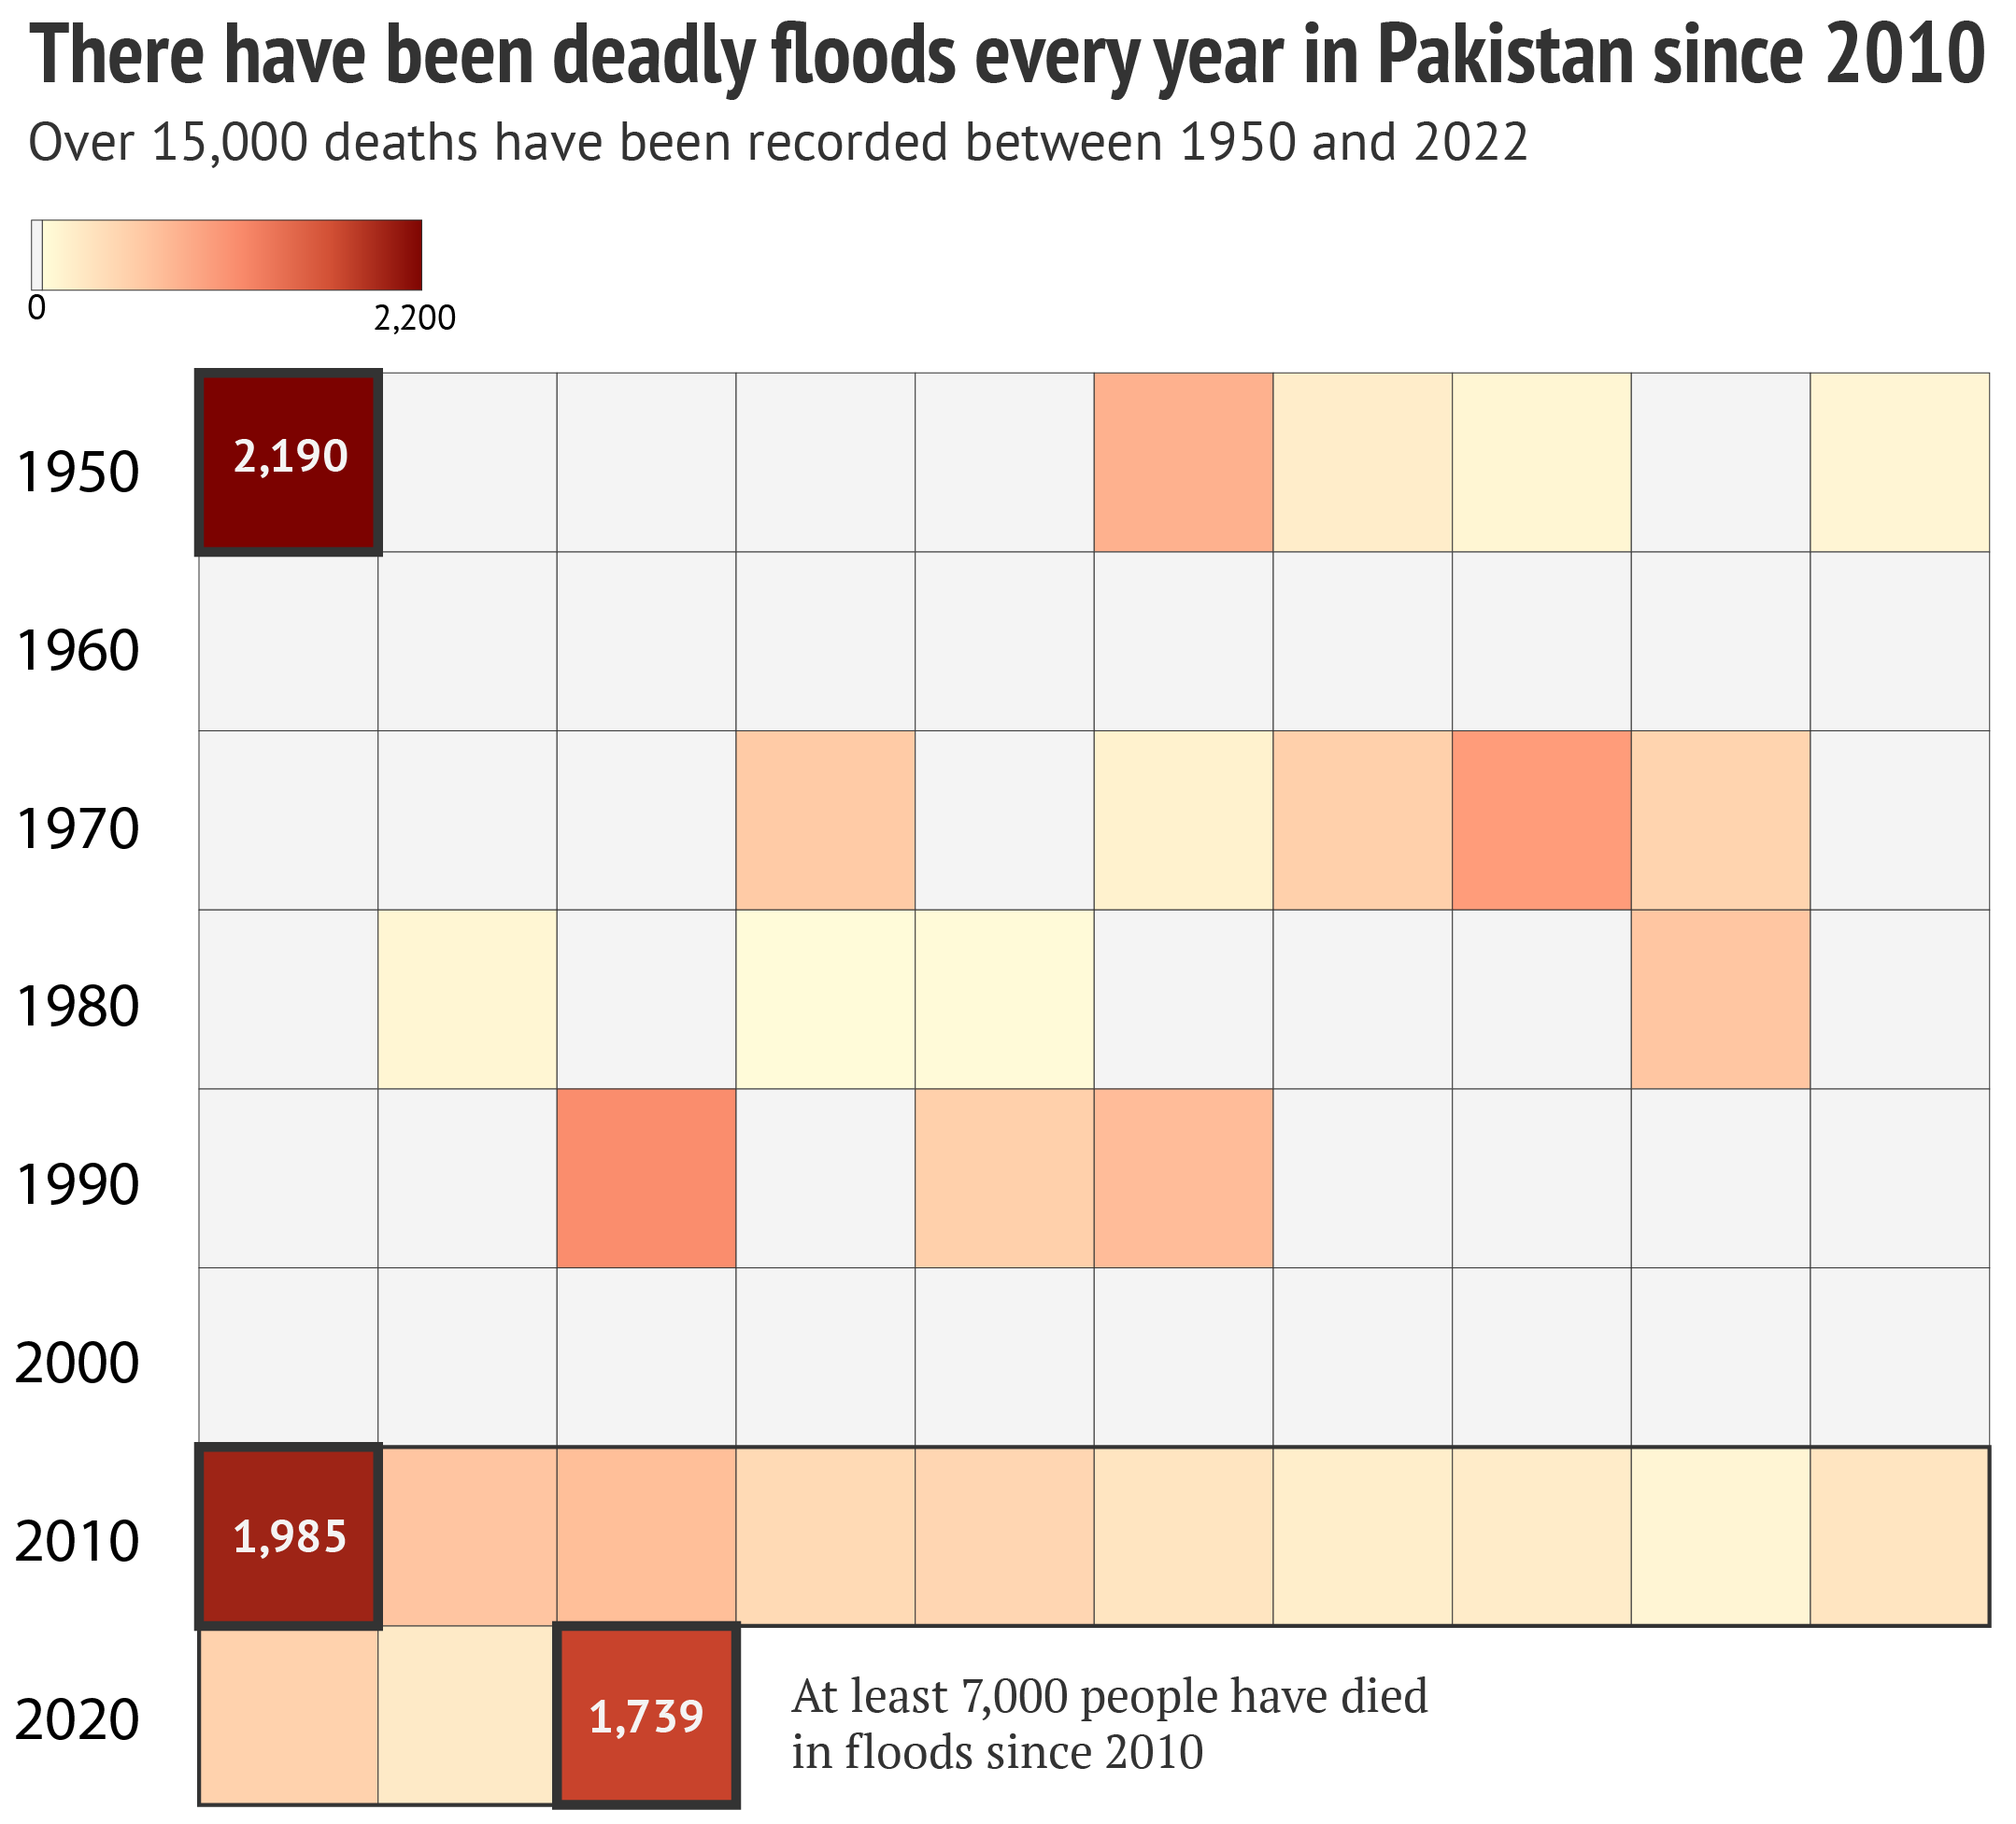 Graphic showing that there have been deadly floods every year in Pakistan since 2010.